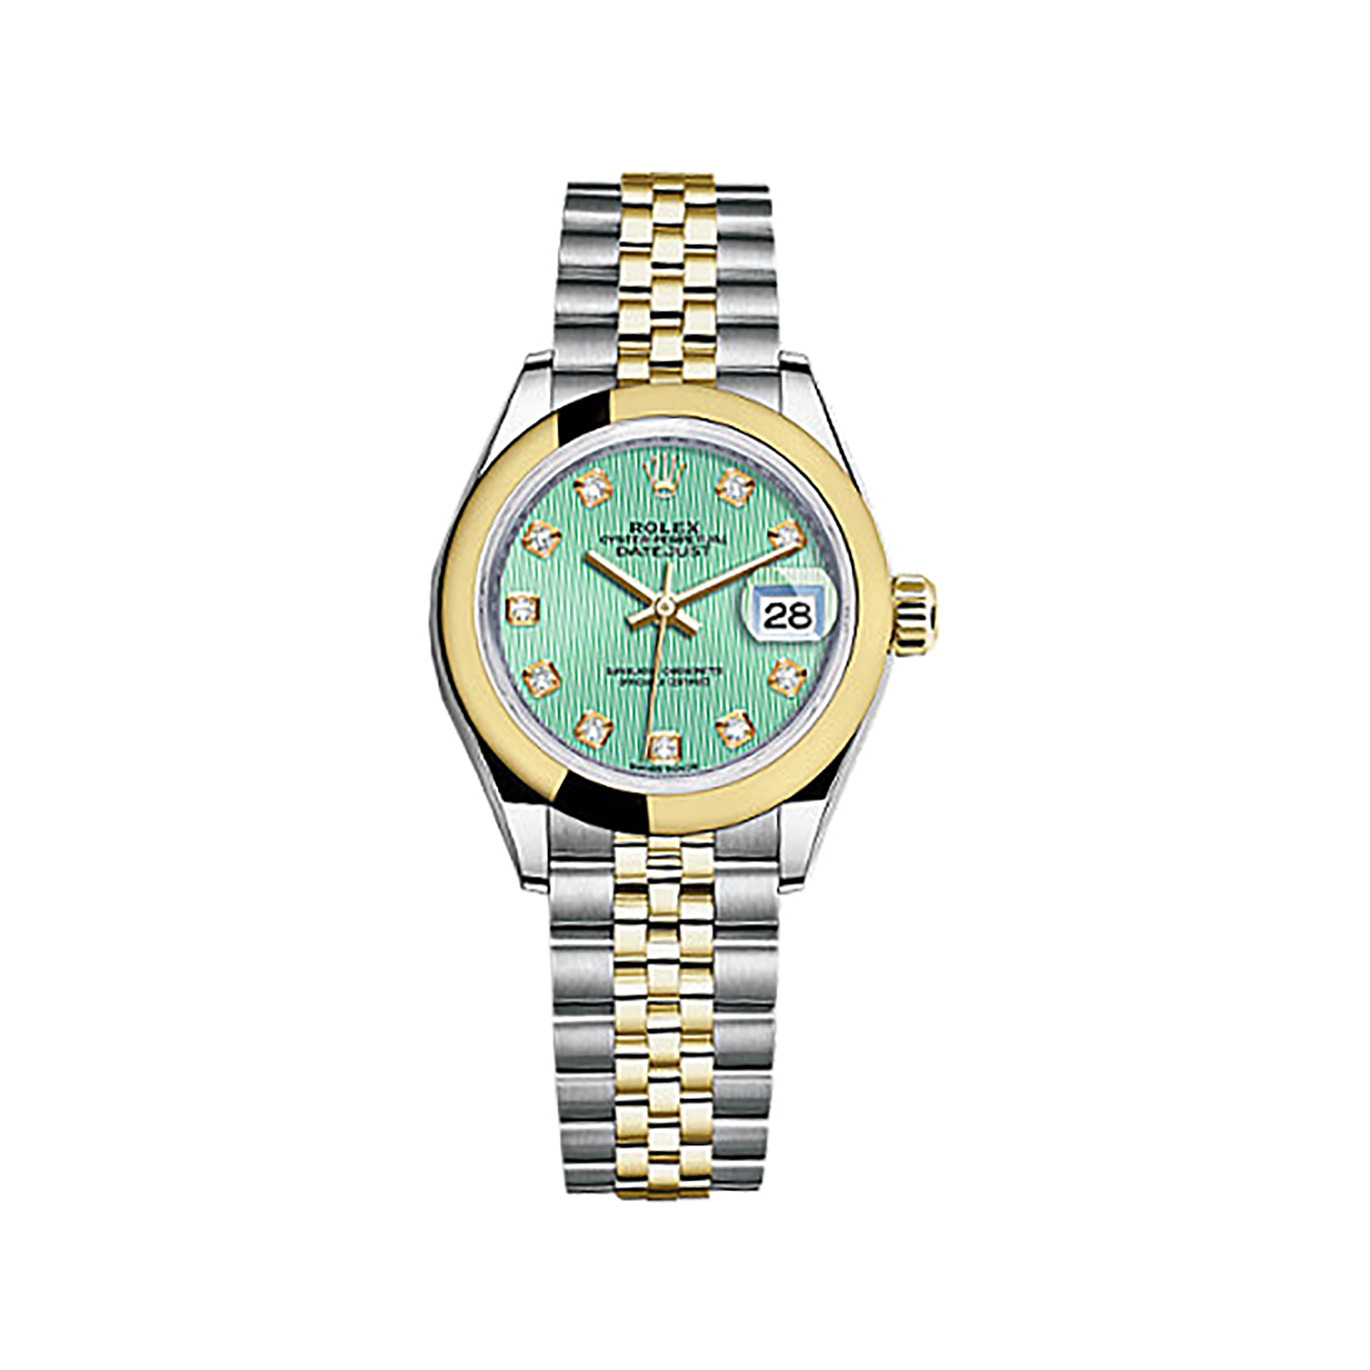 Lady-Datejust 28 279163 Gold & Stainless Steel Watch (Mint Green Set with Diamonds)